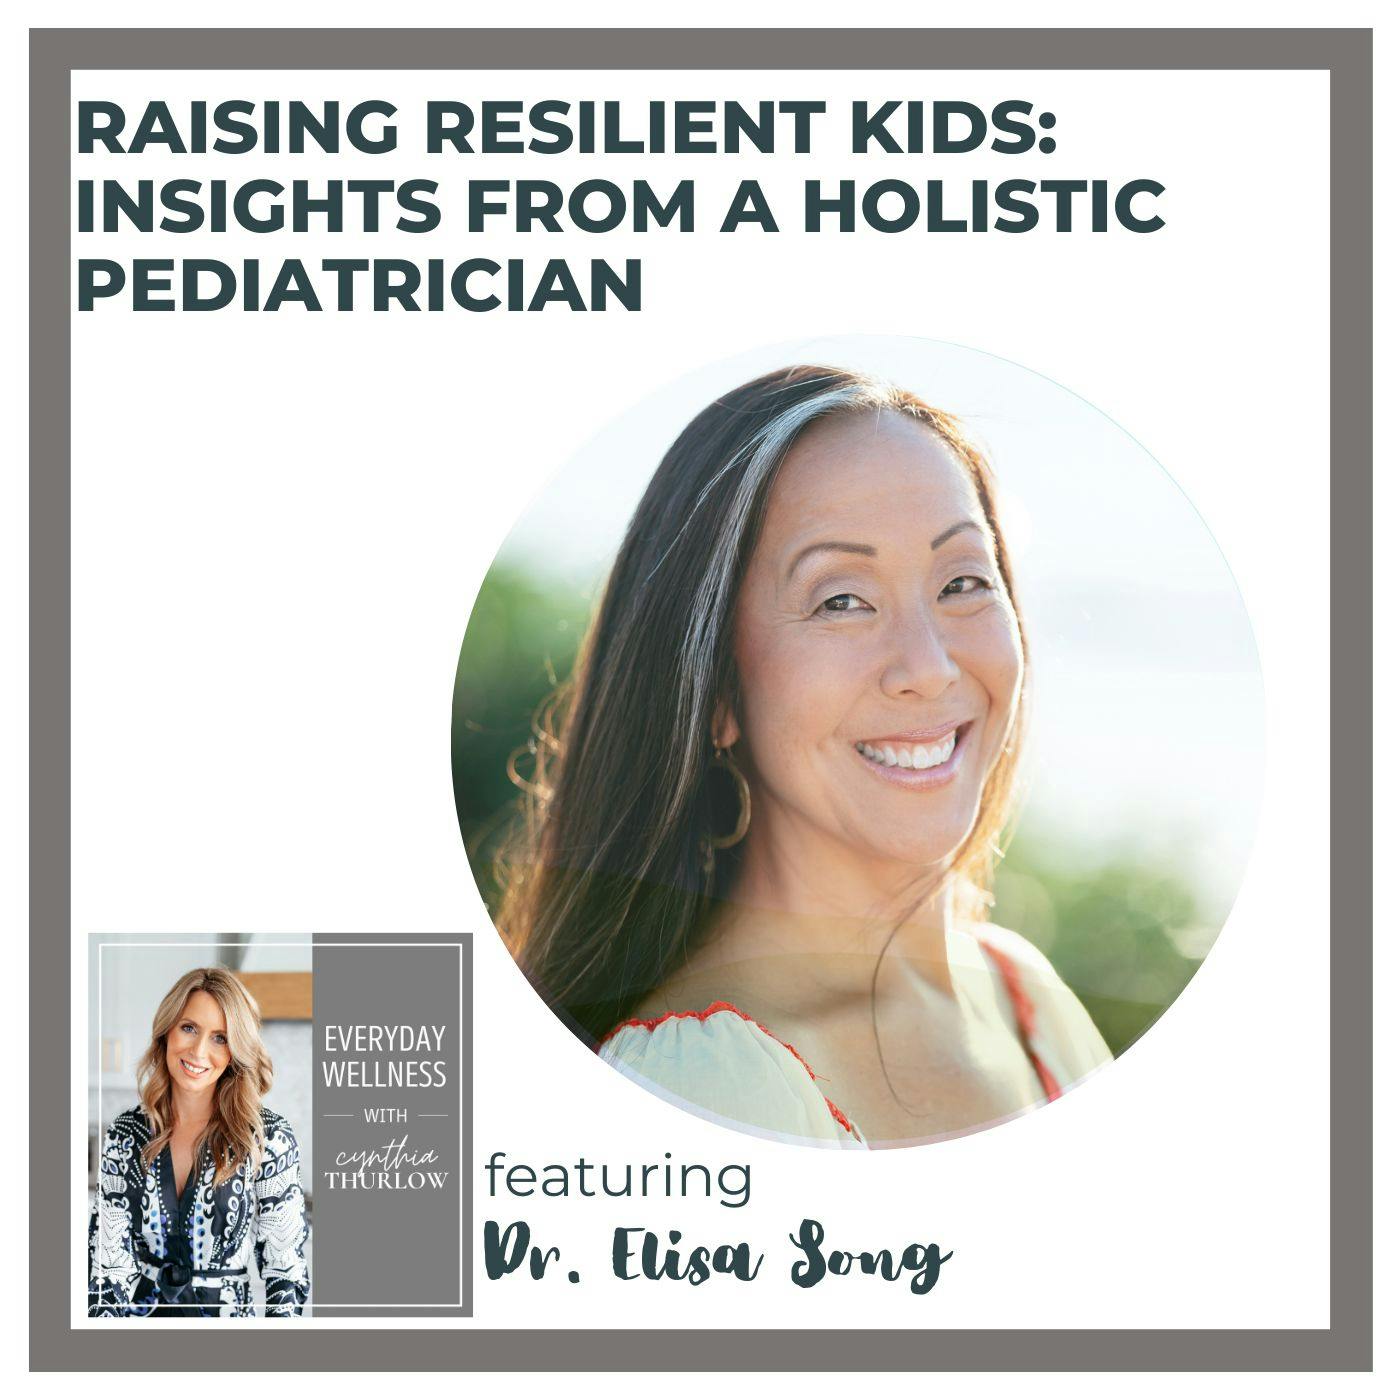 Ep. 360 Raising Resilient Kids: Insights from Holistic Pediatrician, Dr. Elisa Song